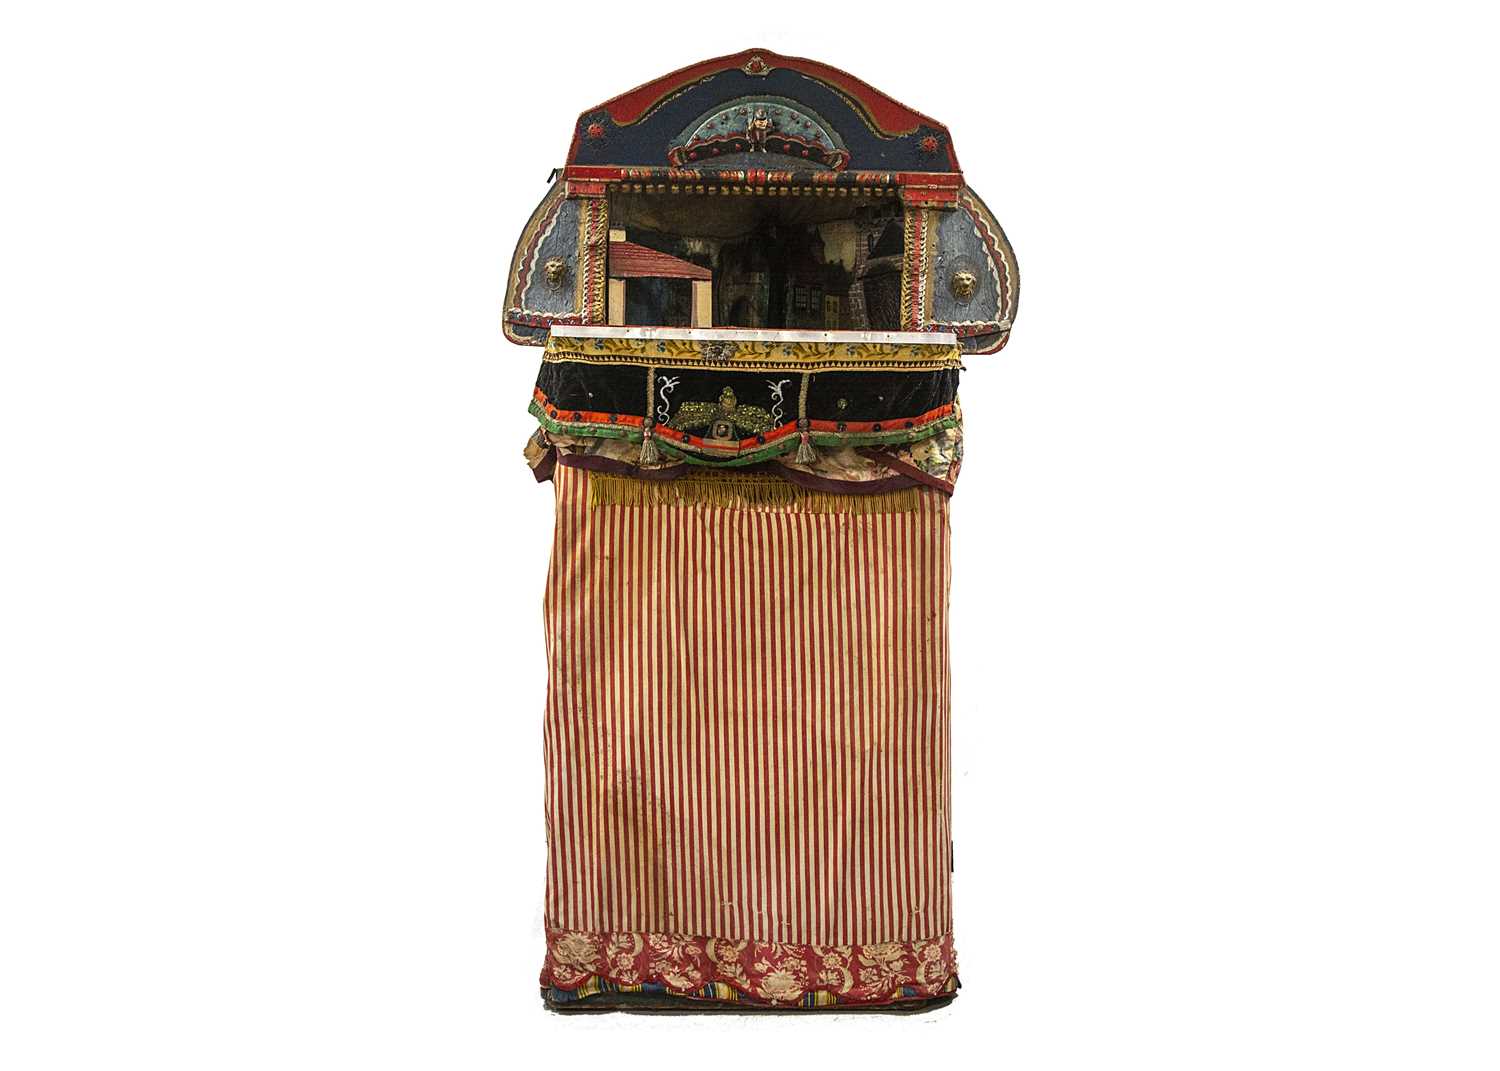 A rare late 19th century large professional Punch & Judy booth,